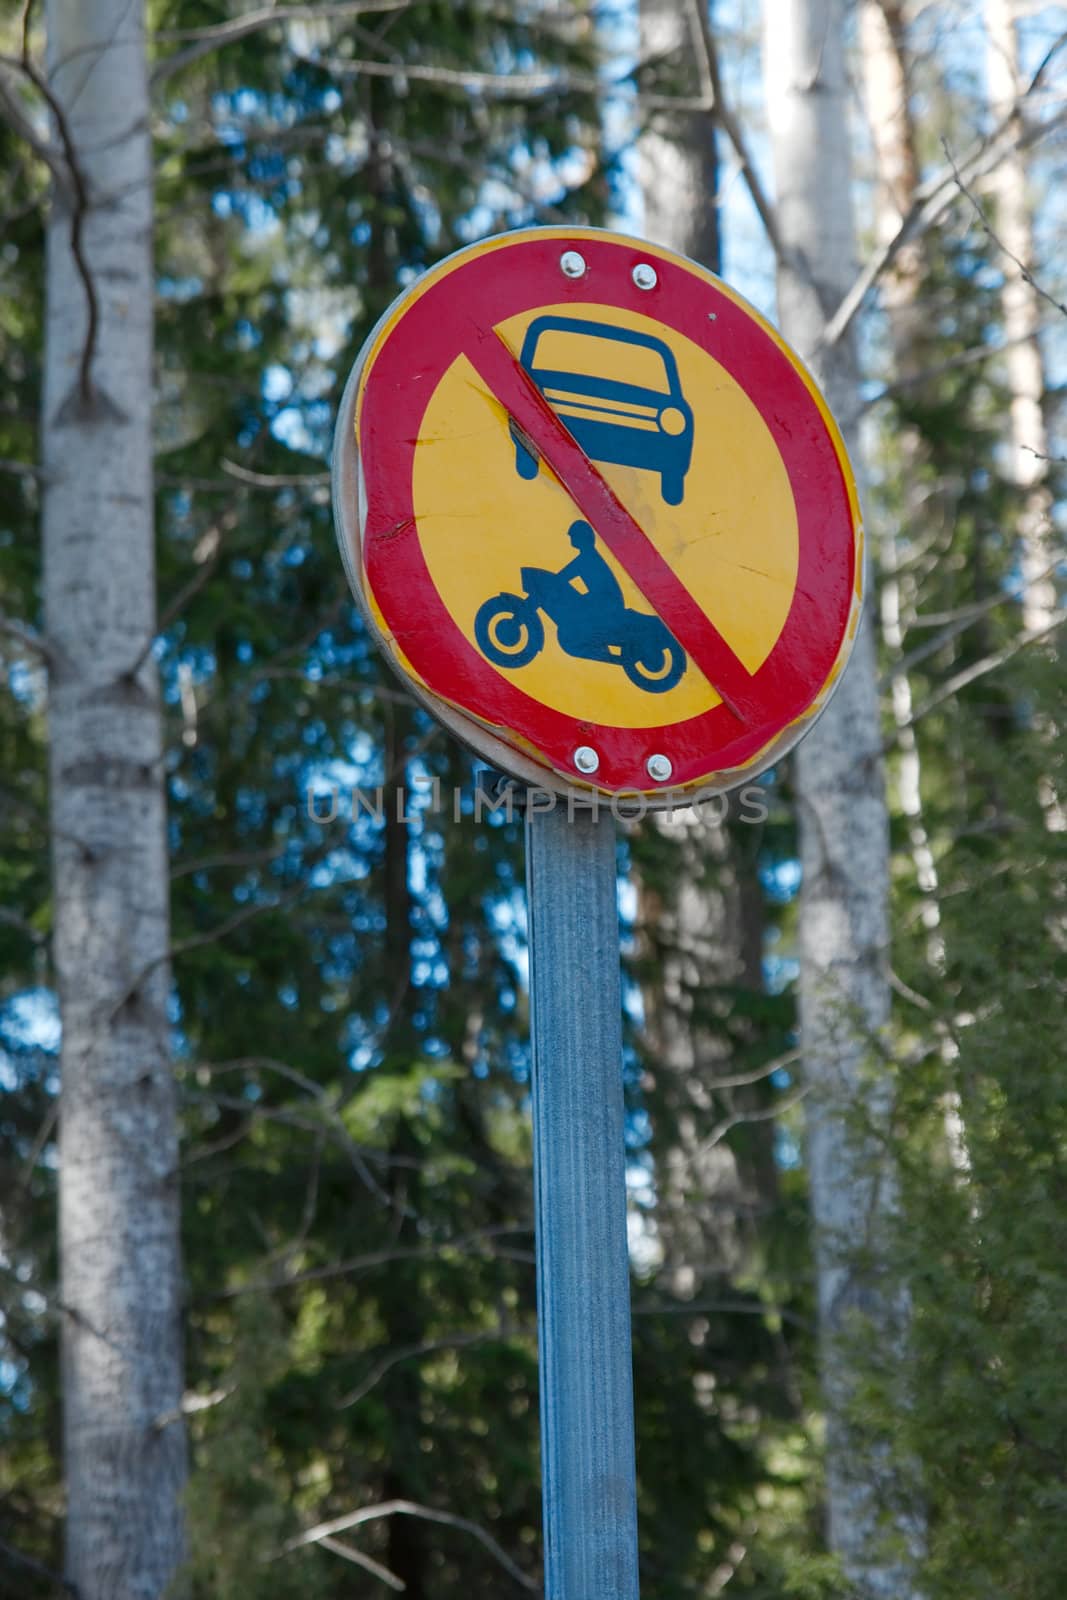 No motorcars allowed sign at the edge of a protected forest